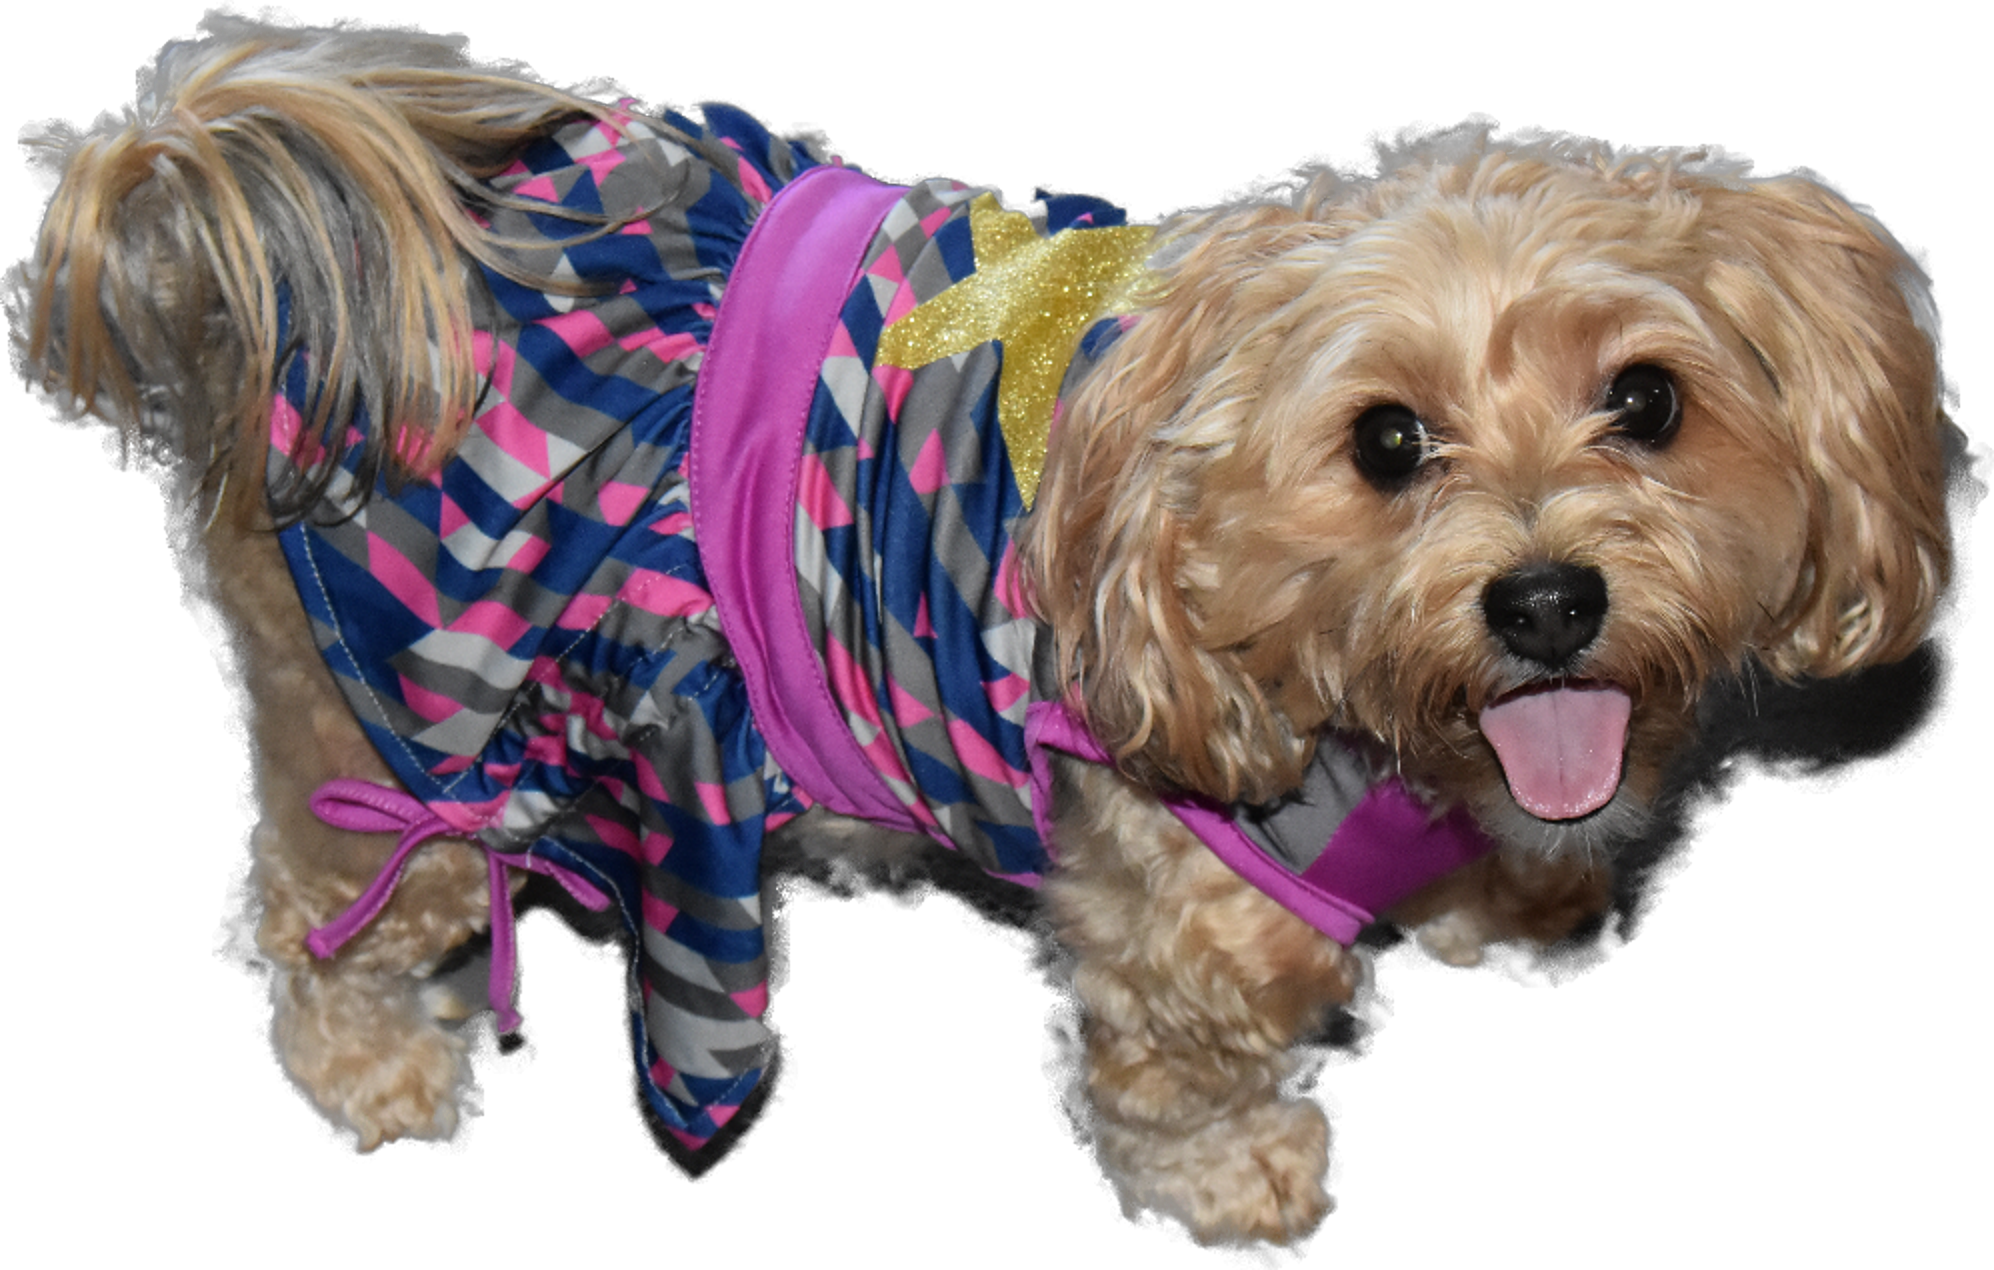 dogs, designer dogs, yorkipoo, yorkie poo, dog dress, dog smiling, tongue out